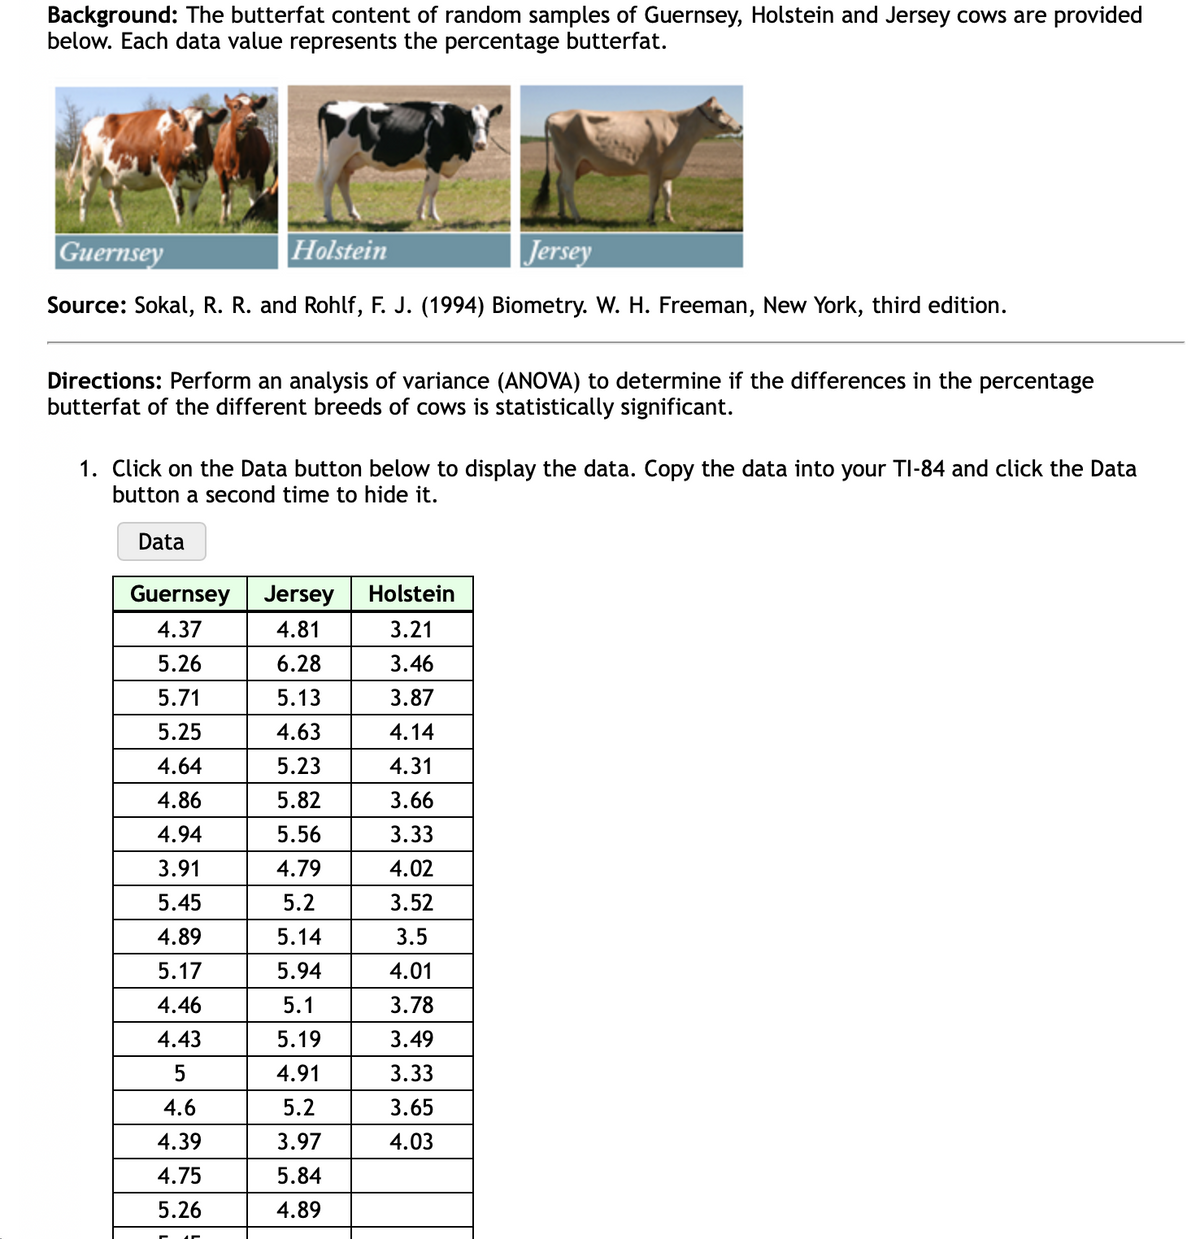 Background: The butterfat content of random samples of Guernsey, Holstein and Jersey cows are provided
below. Each data value represents the percentage butterfat.
Guernsey
Holstein
Jersey
Source: Sokal, R. R. and Rohlf, F. J. (1994) Biometry. W. H. Freeman, New York, third edition.
Directions: Perform an analysis of variance (ANOVA) to determine if the differences in the percentage
butterfat of the different breeds of cows is statistically significant.
1. Click on the Data button below to display the data. Copy the data into your TI-84 and click the Data
button a second time to hide it.
Data
Guernsey
Jersey
Holstein
4.37
4.81
3.21
5.26
6.28
3.46
5.71
5.13
3.87
5.25
4.63
4.14
4.64
5.23
4.31
4.86
5.82
3.66
4.94
5.56
3.33
3.91
4.79
4.02
5.45
5.2
3.52
4.89
5.14
3.5
5.17
5.94
4.01
4.46
5.1
3.78
4.43
5.19
3.49
4.91
3.33
4.6
5.2
3.65
4.39
3.97
4.03
4.75
5.84
5.26
4.89
